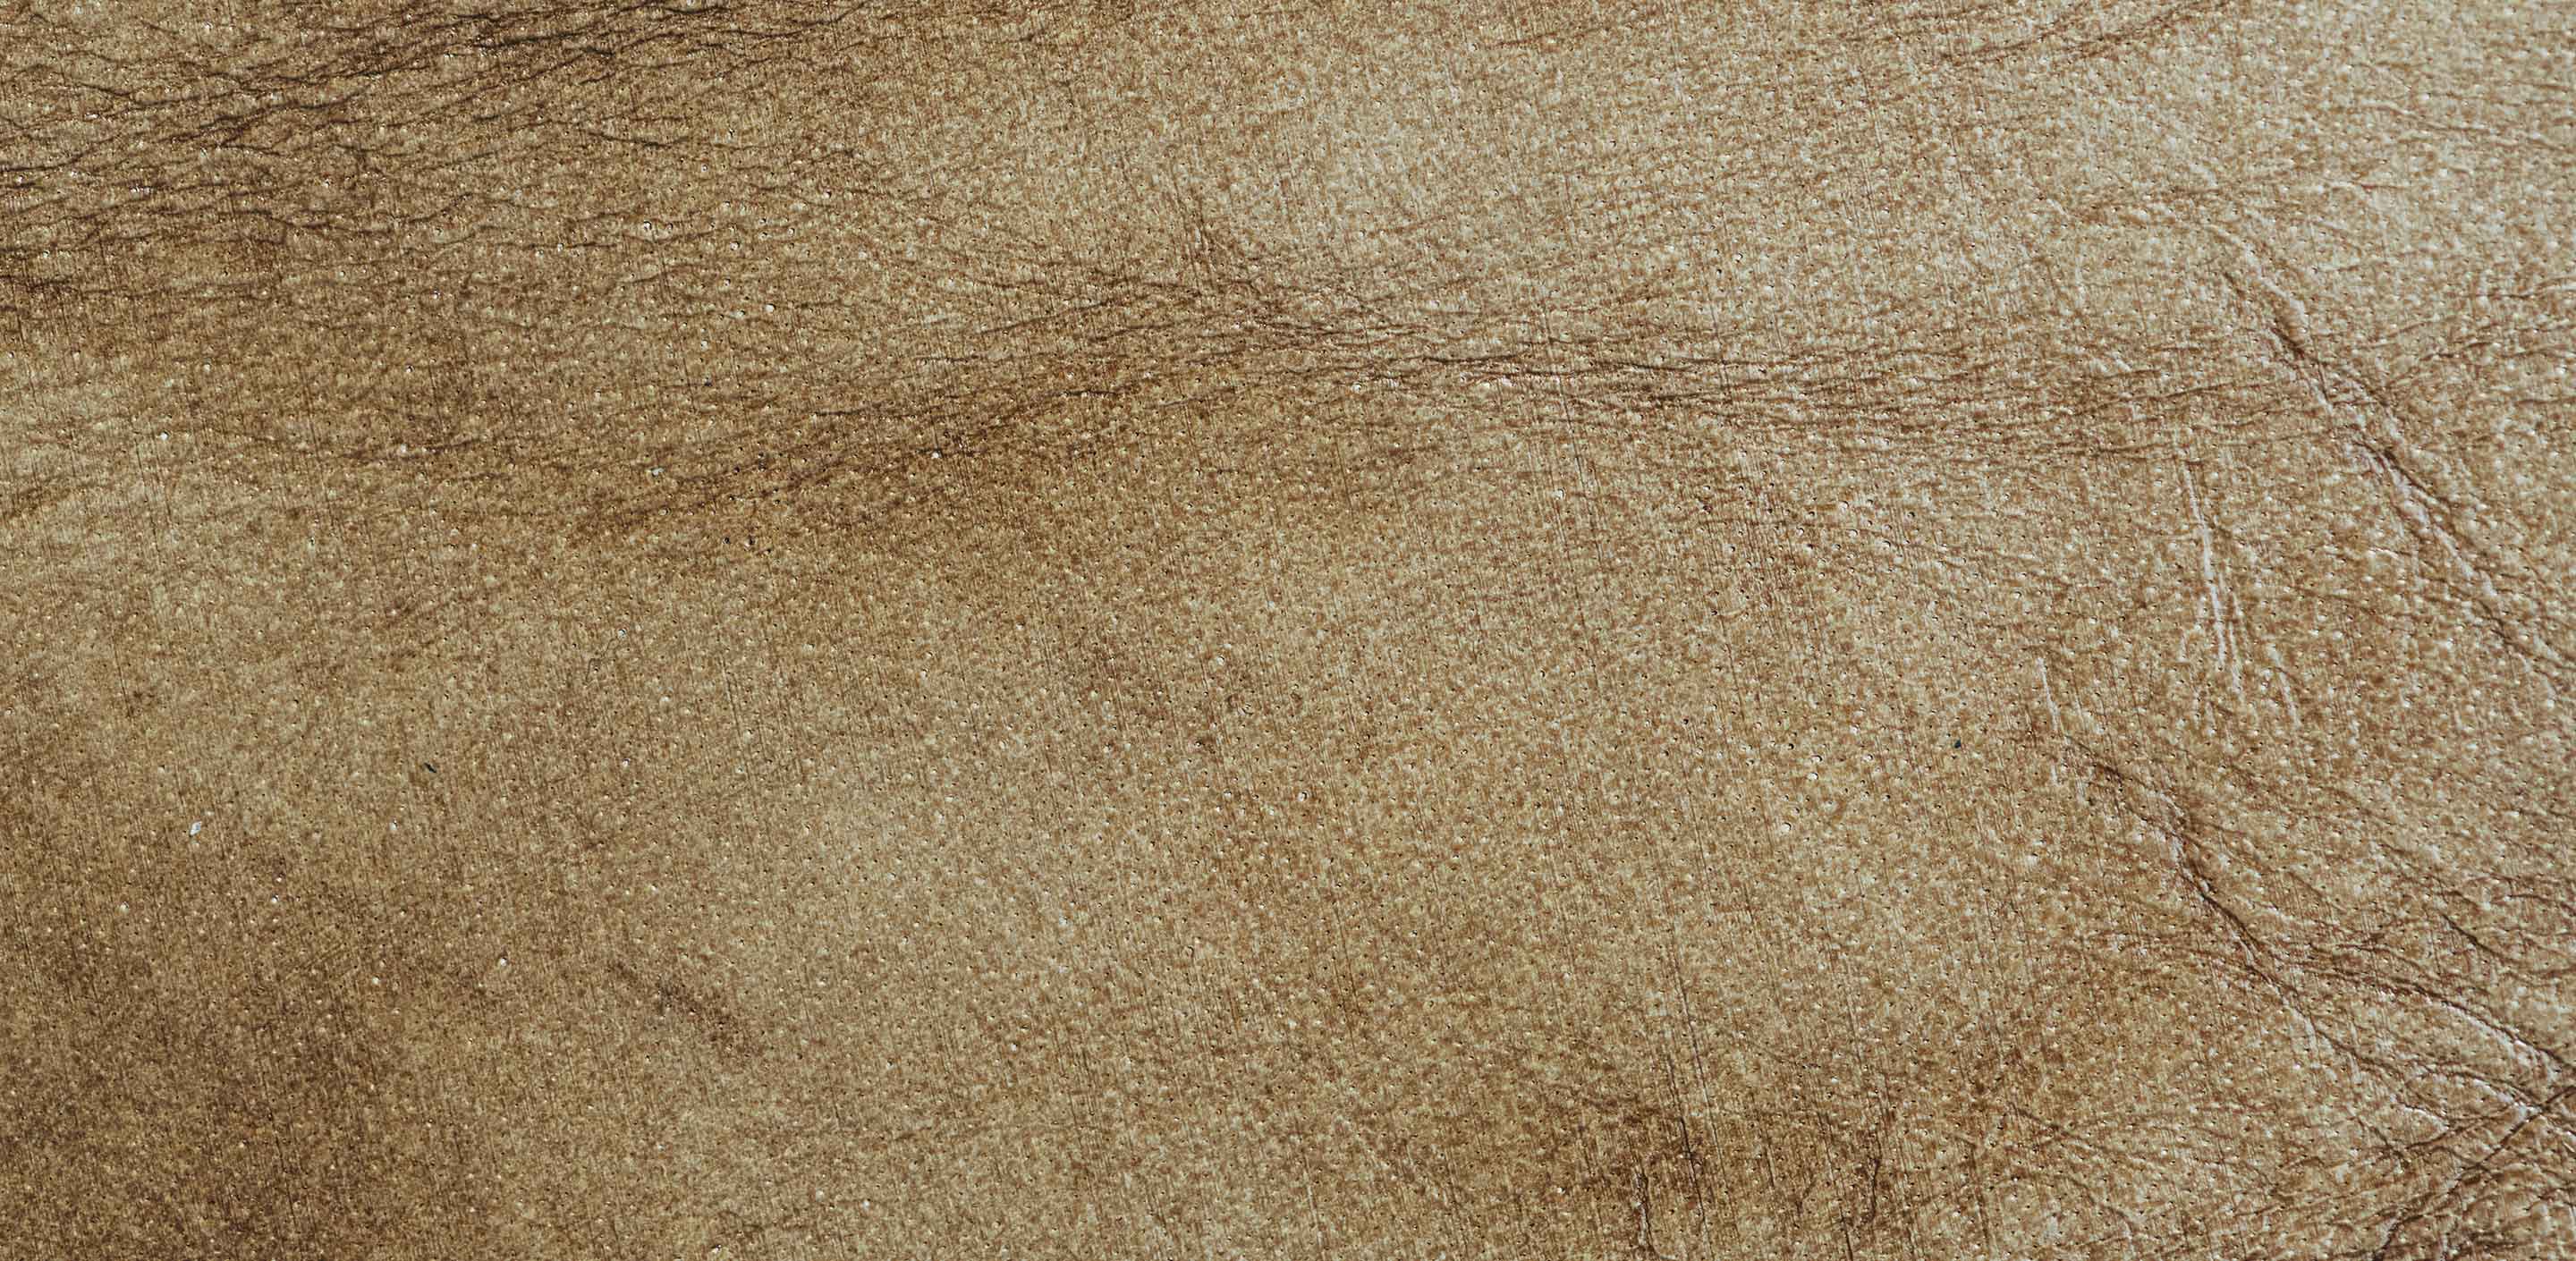 All You Need To Know About Lambskin Leather